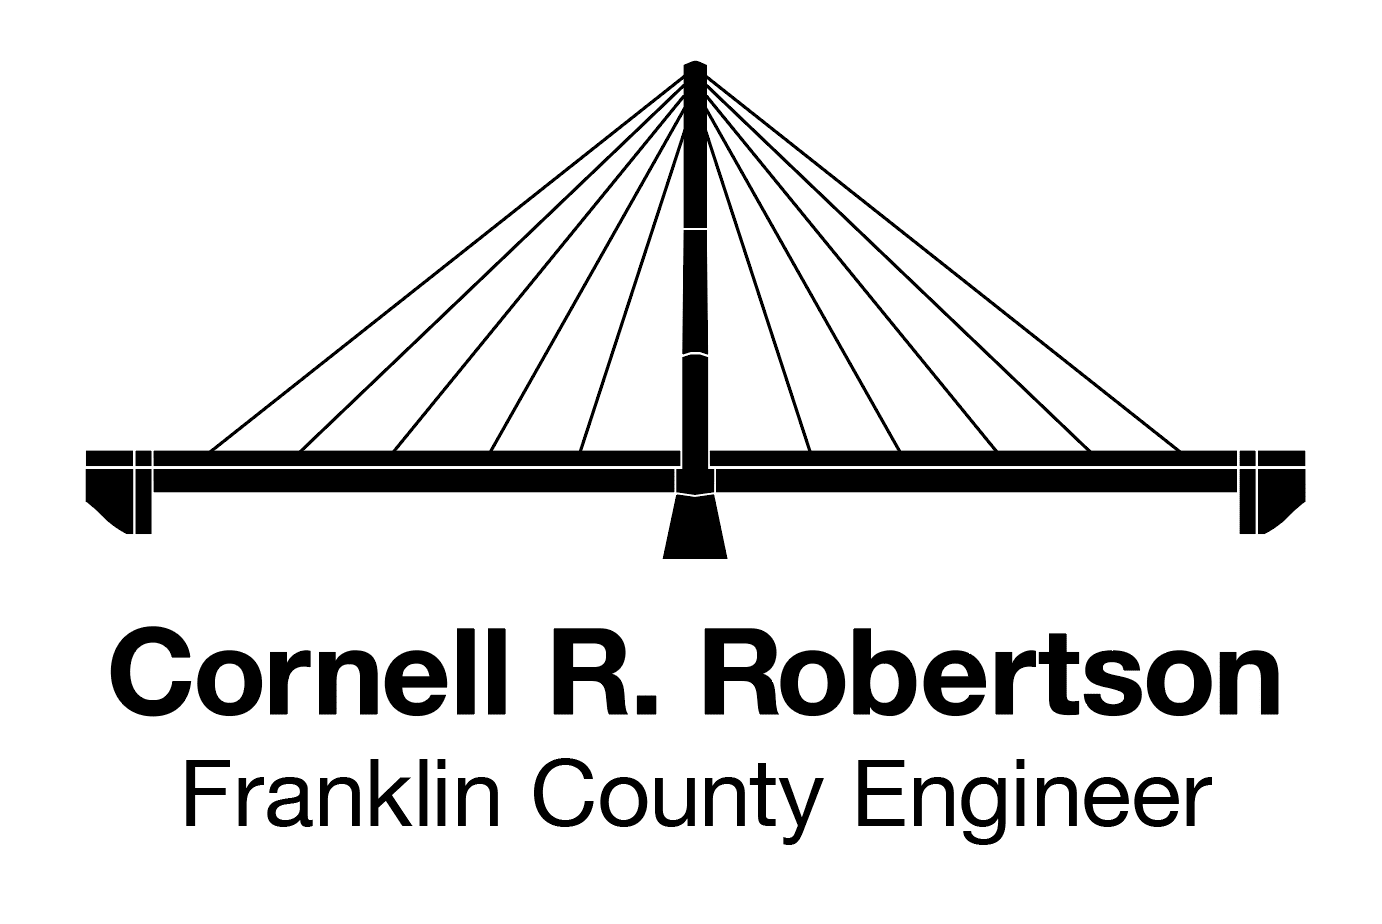 Franklin County Engineer